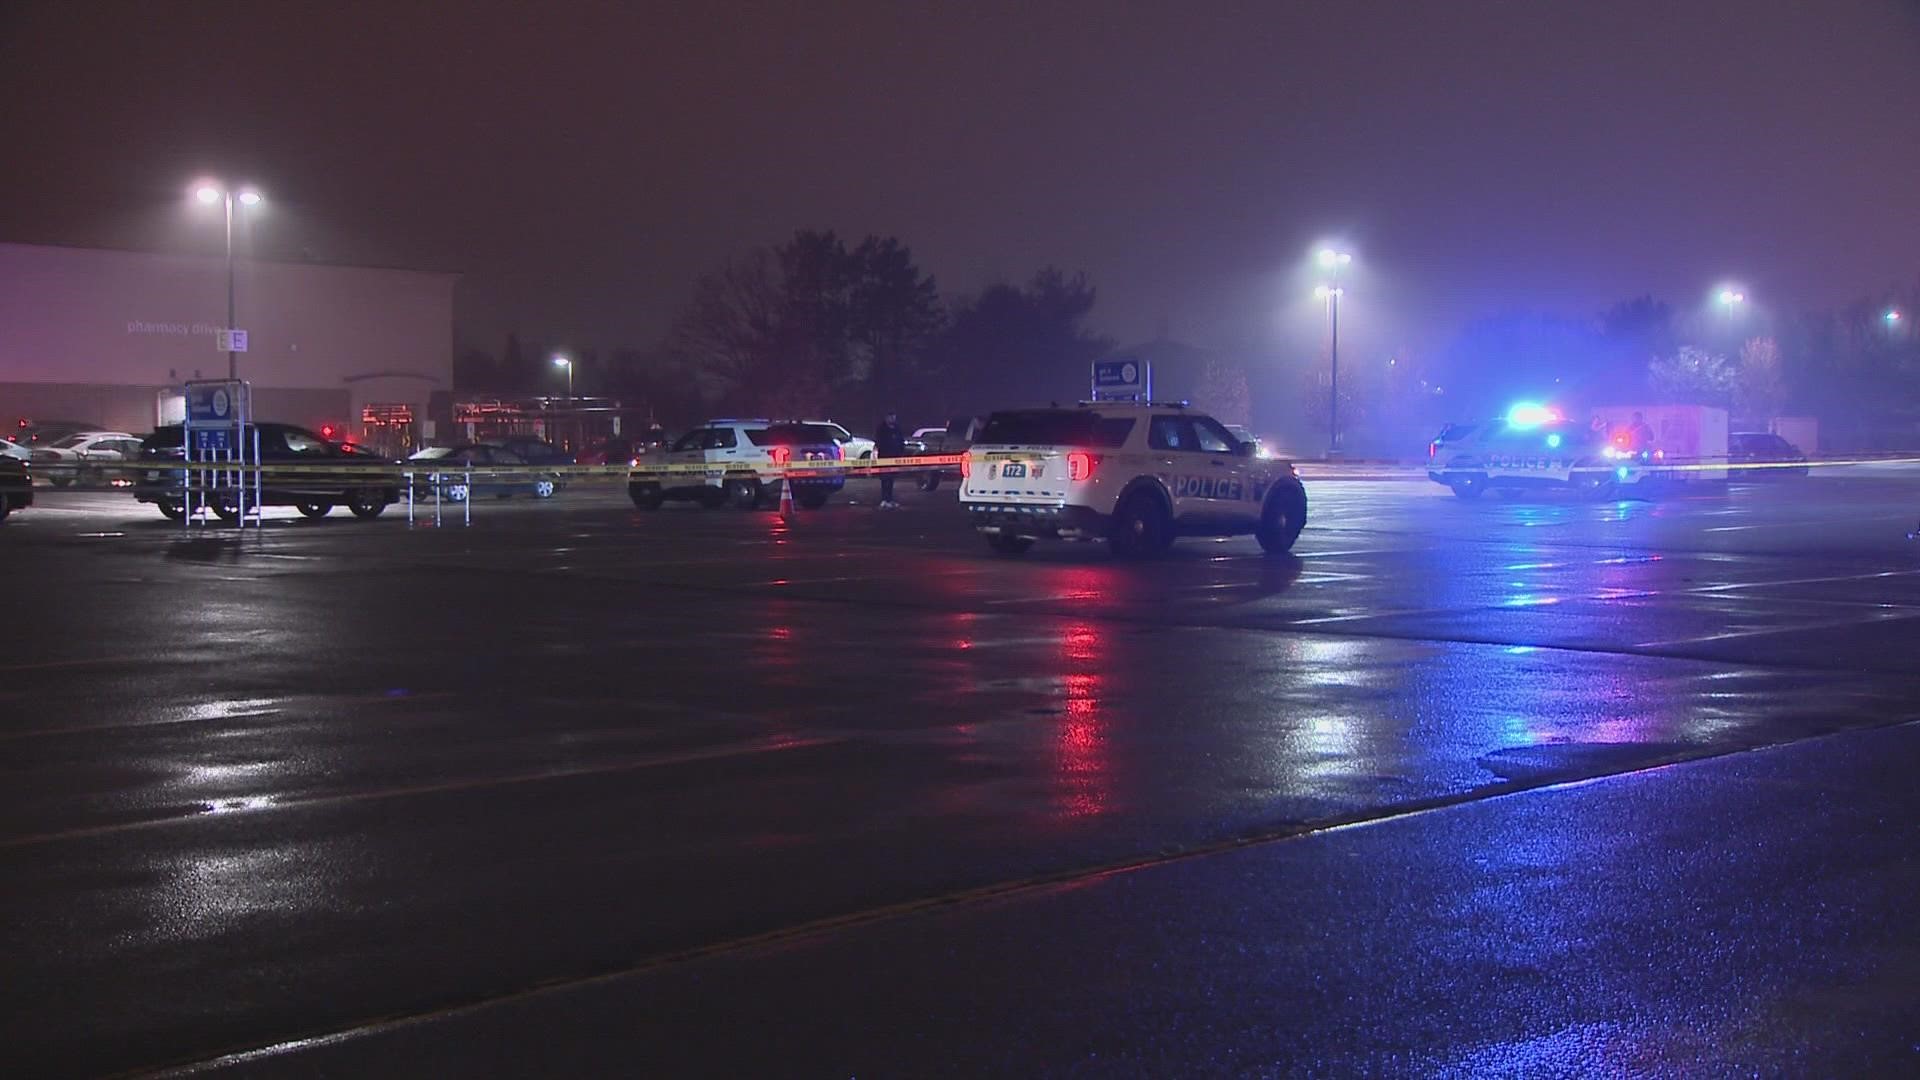 Police said a person shot at a vehicle in the parking lot.